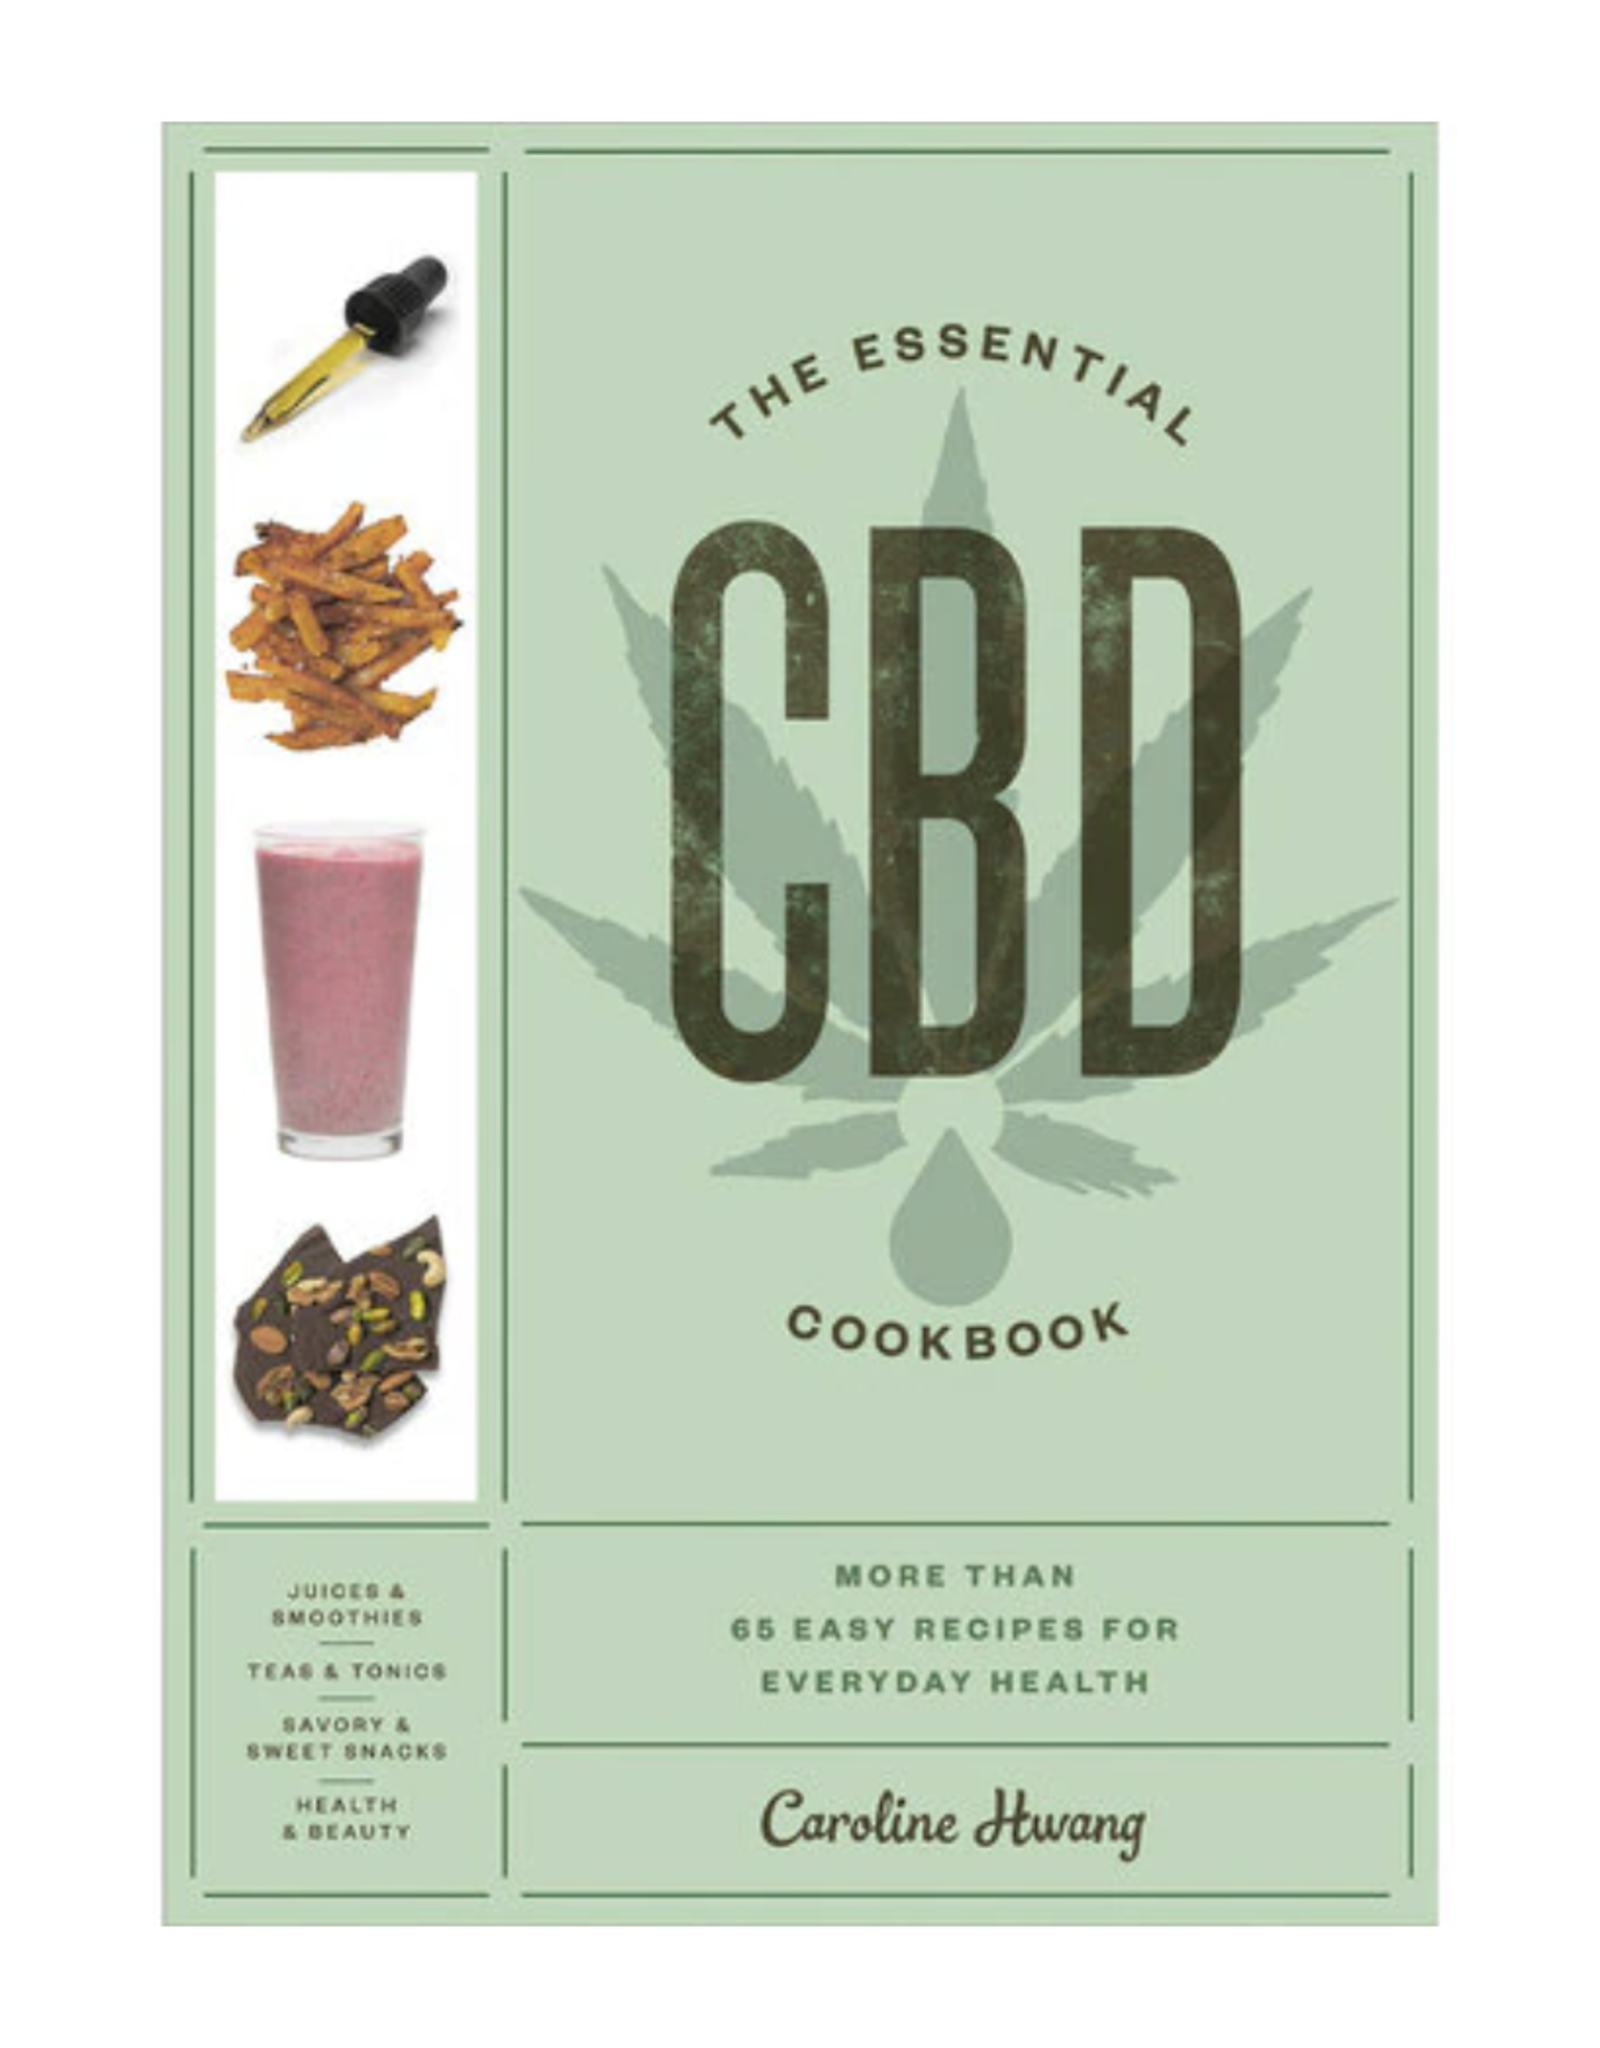 The Essential CBD Cookbook: More Than 65 Easy Recipes for Everyday Health by Caroline HWang